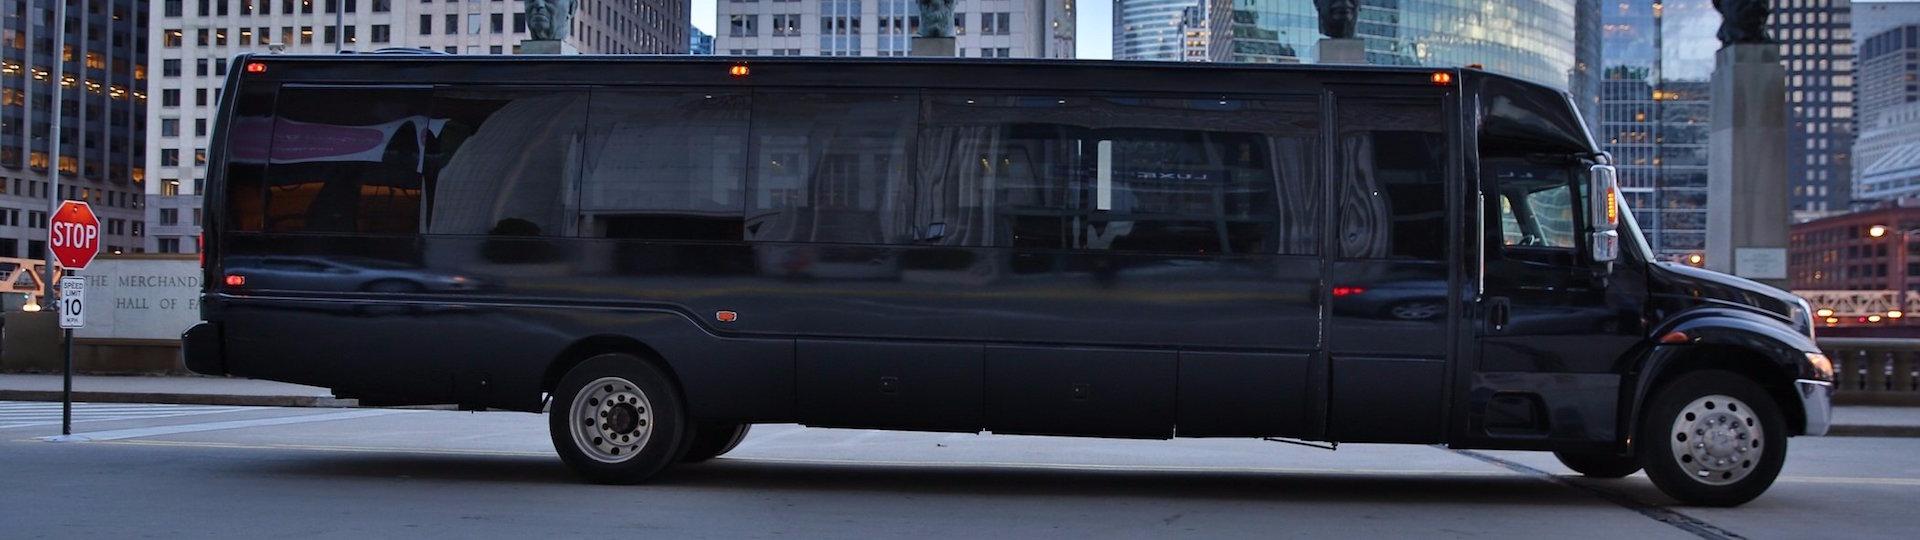 Rent a Party Bus in Chicago